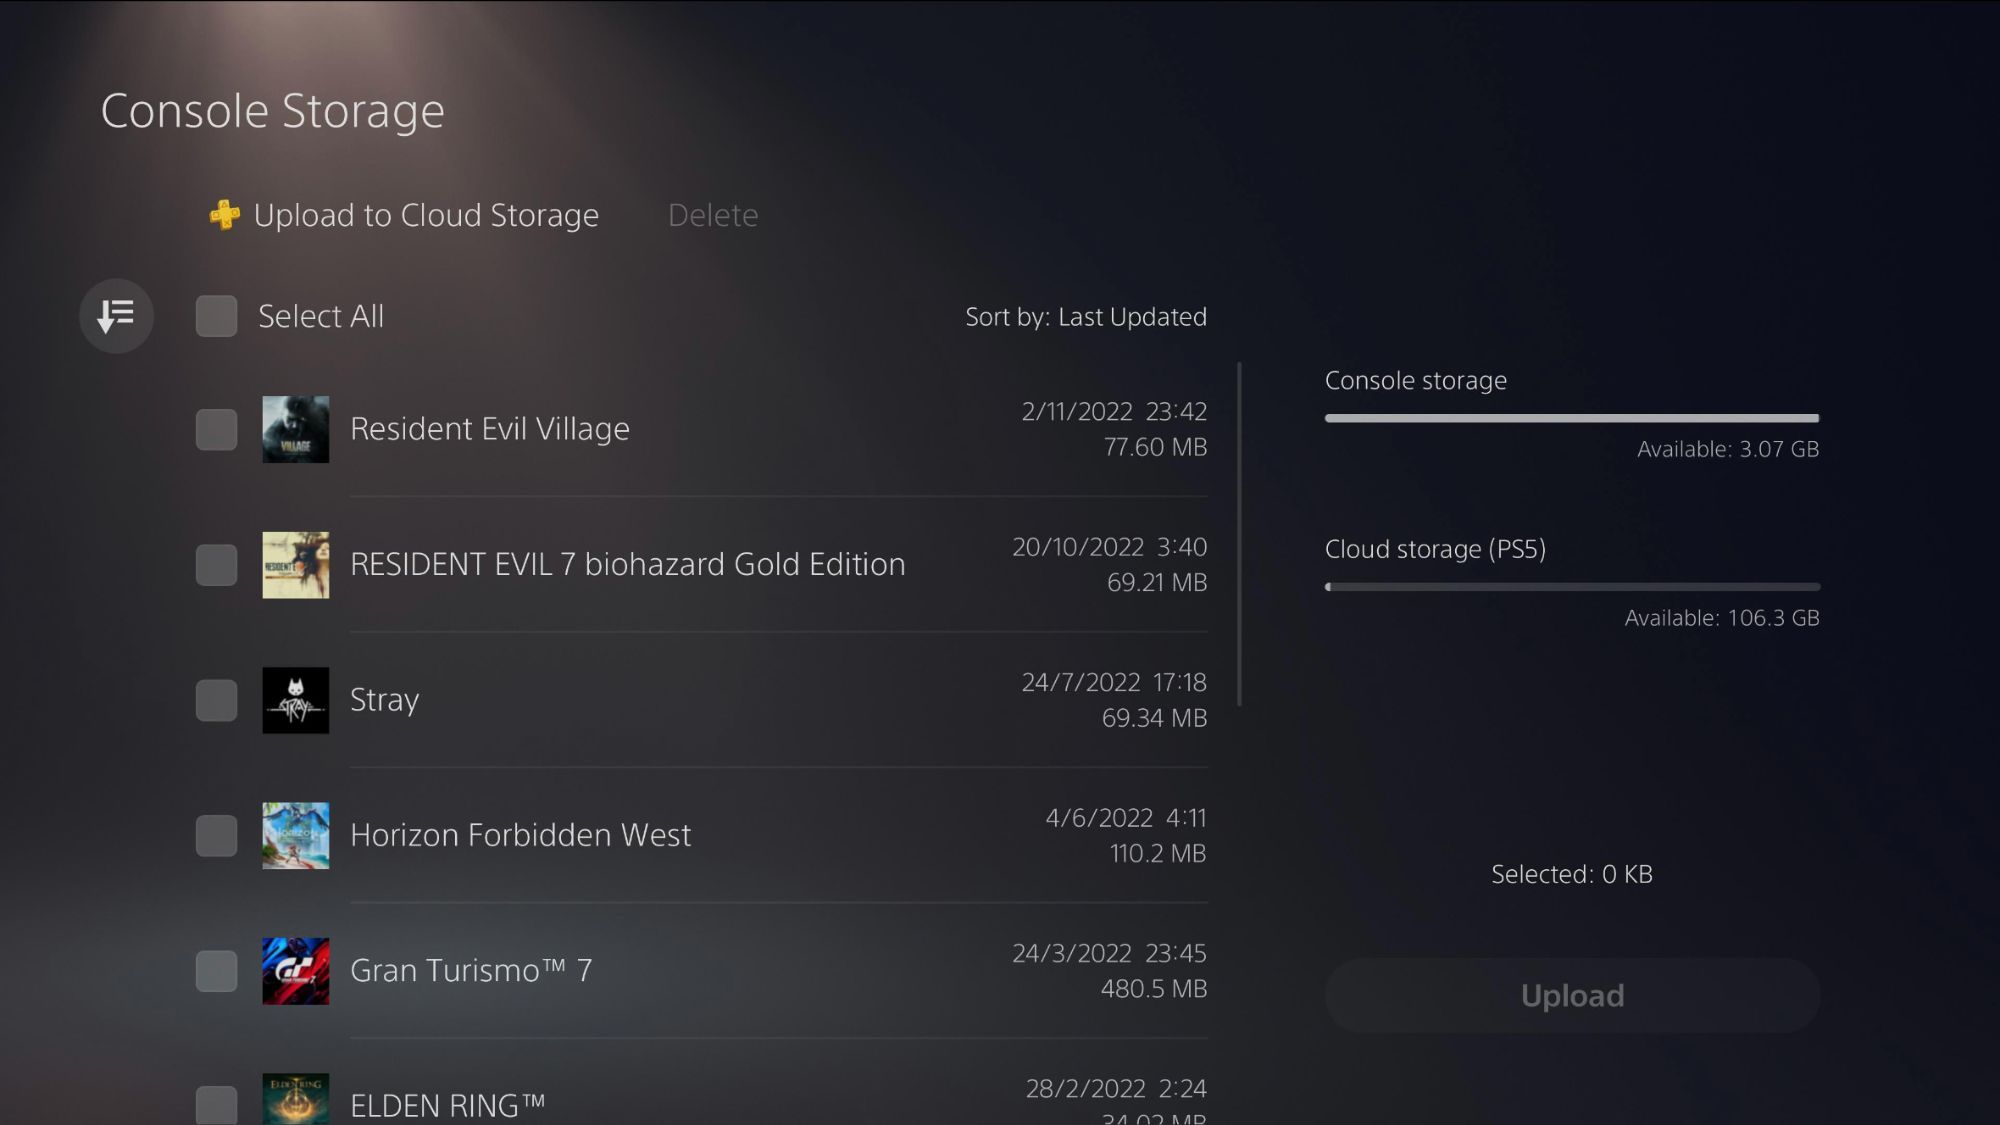 How to download and delete data from Cloud Storage PS5 Console Storage